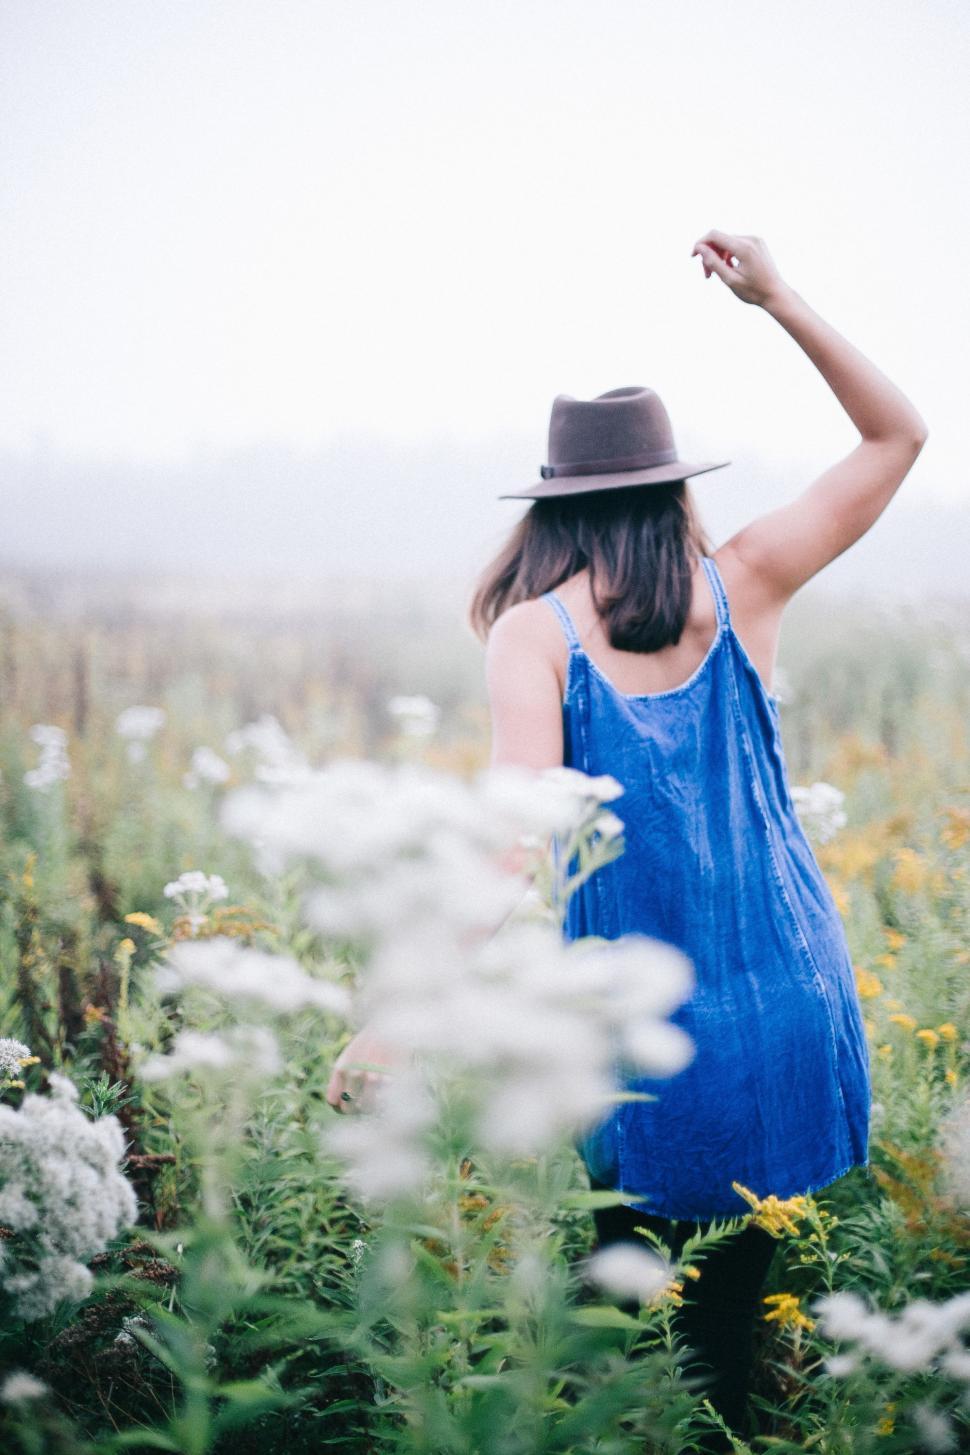 Free Image of Woman in Blue Dress and Hat in Field of Flowers 